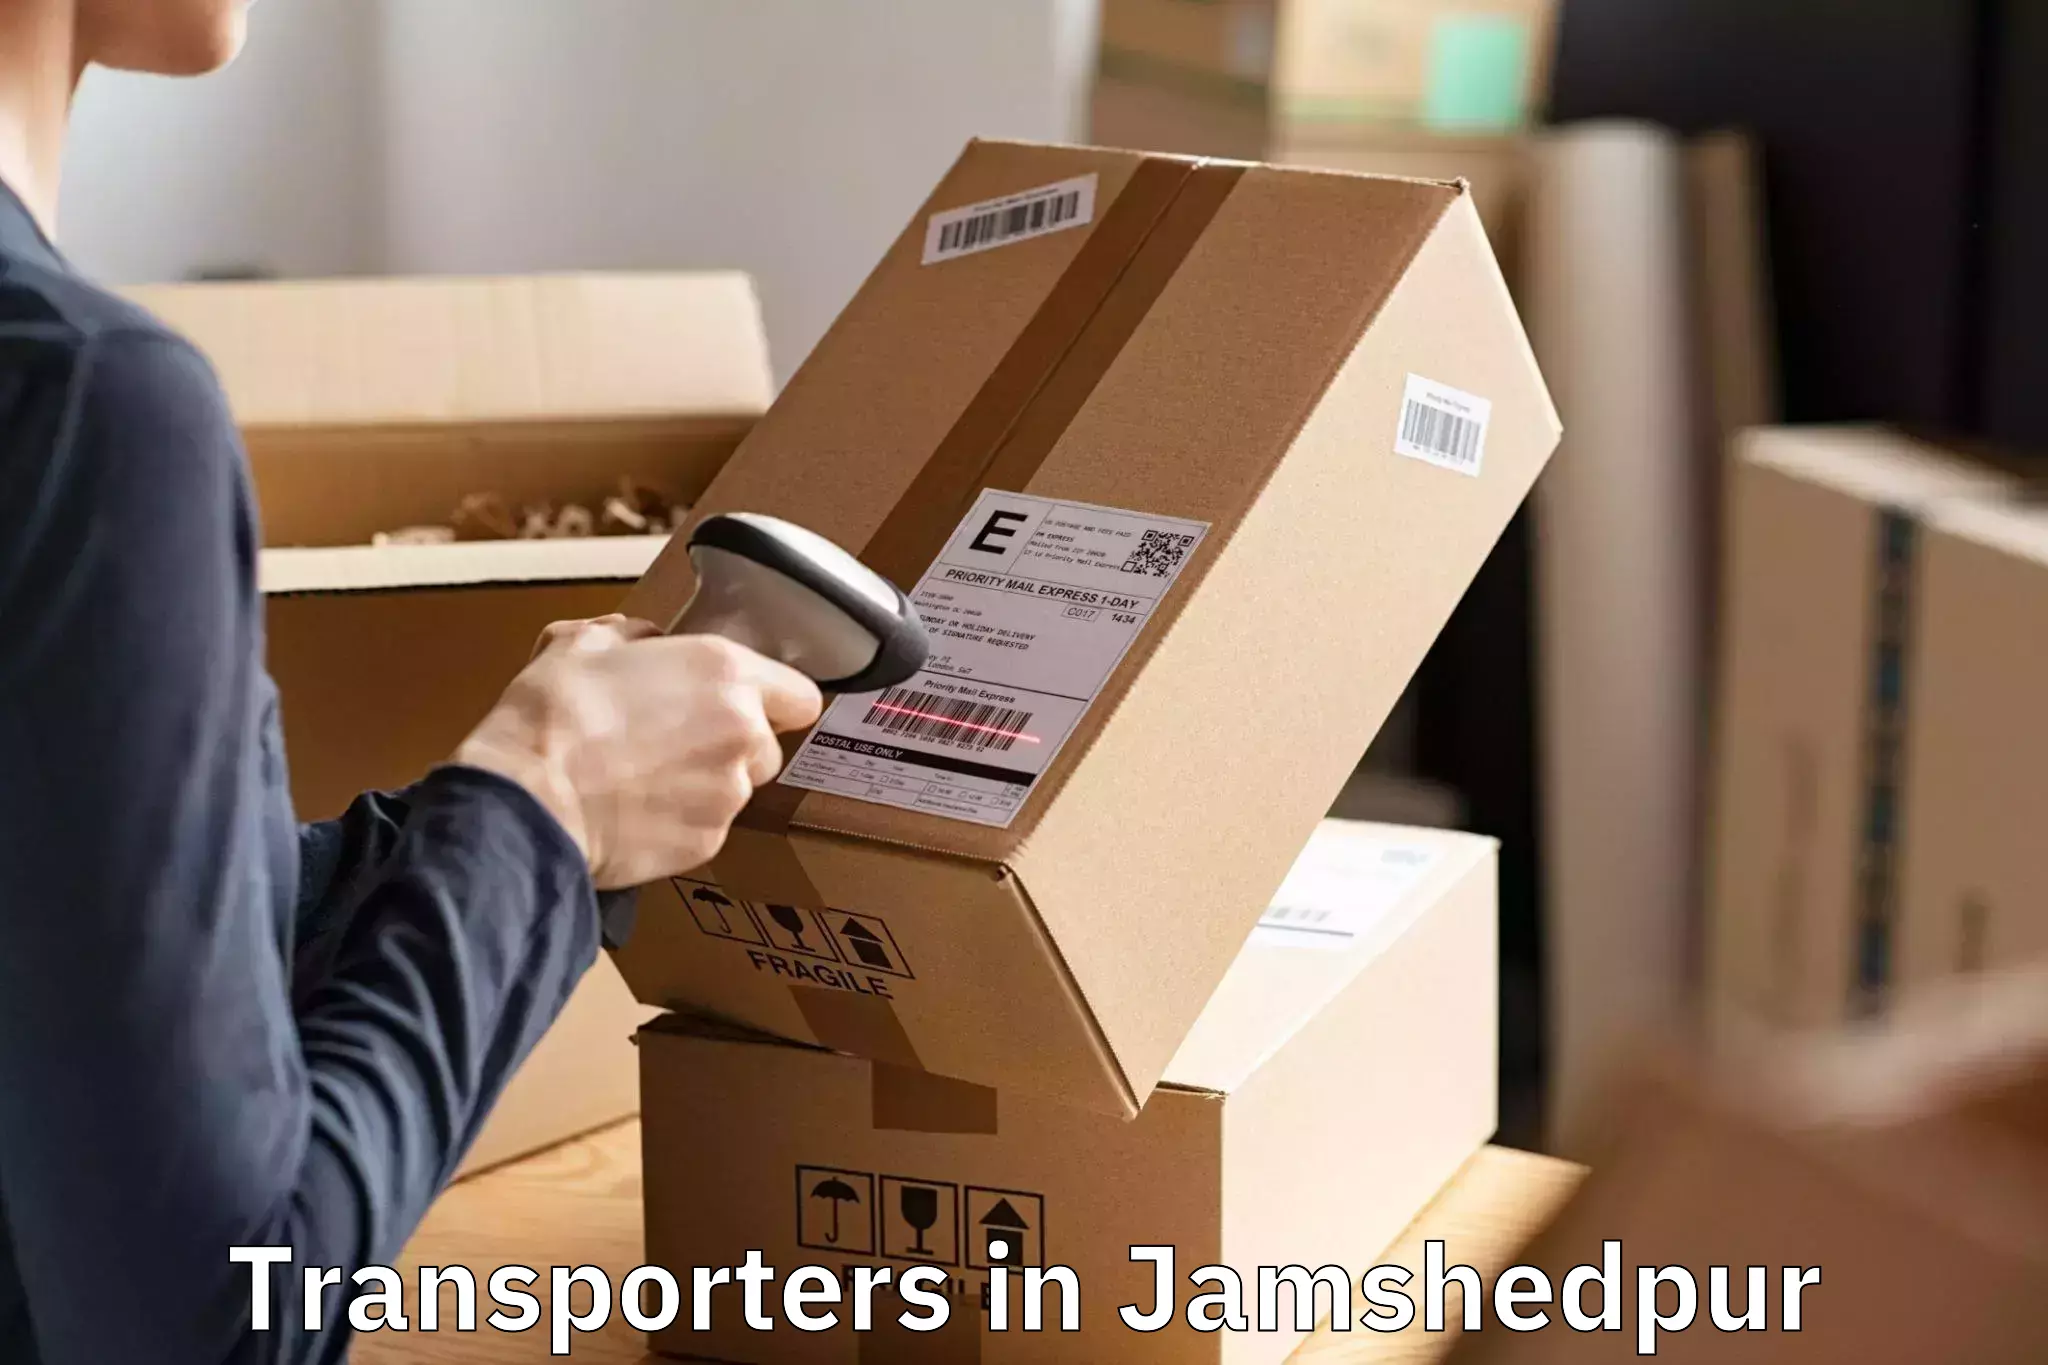 Trusted Transporters in Jamshedpur, Jharkhand (JH)